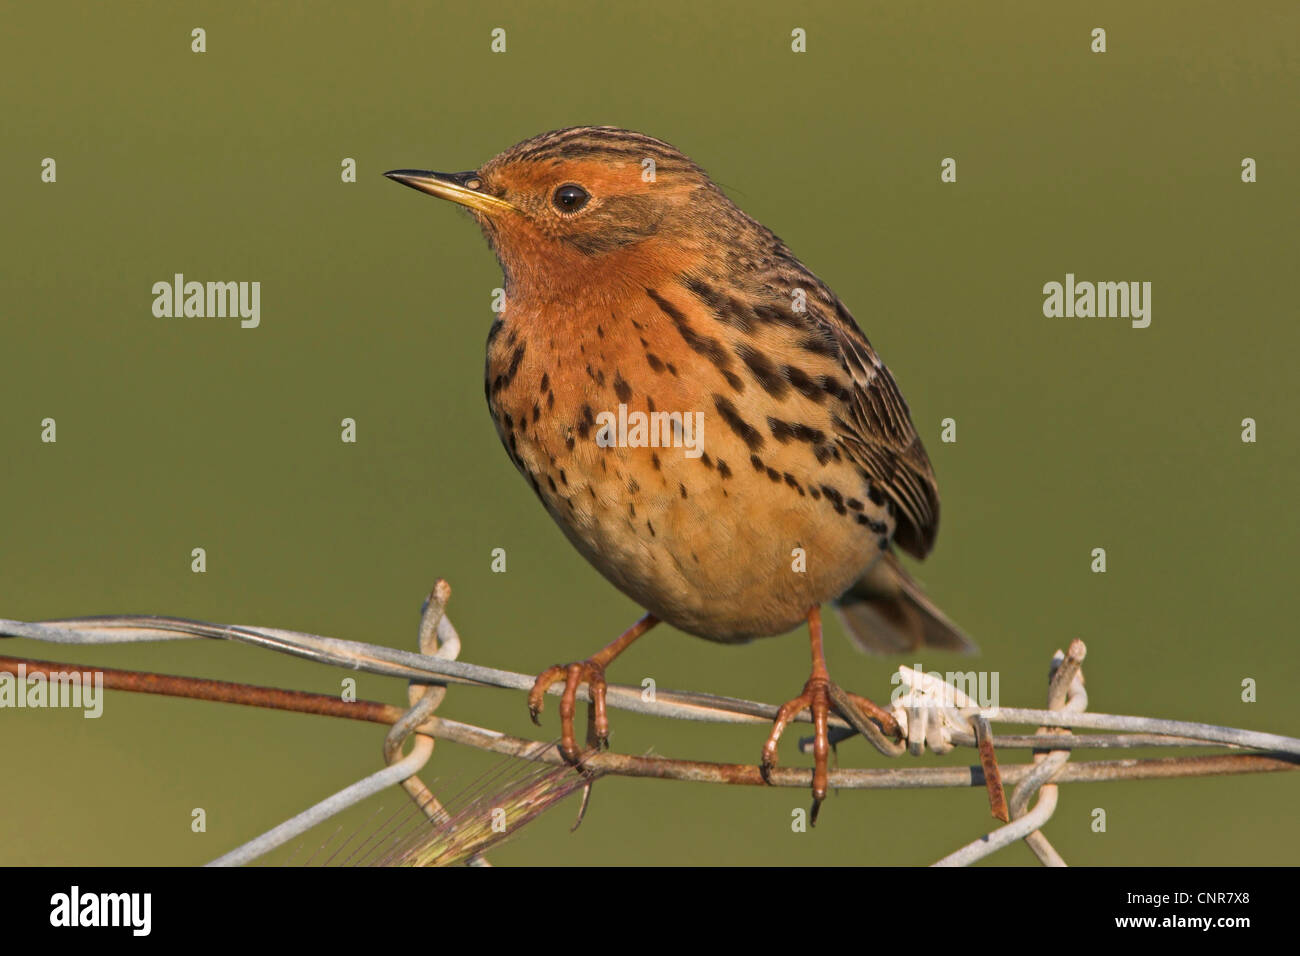 red-throated pitpit (Anthus cervinus), sitting on barbed wire fence, Europe Stock Photo